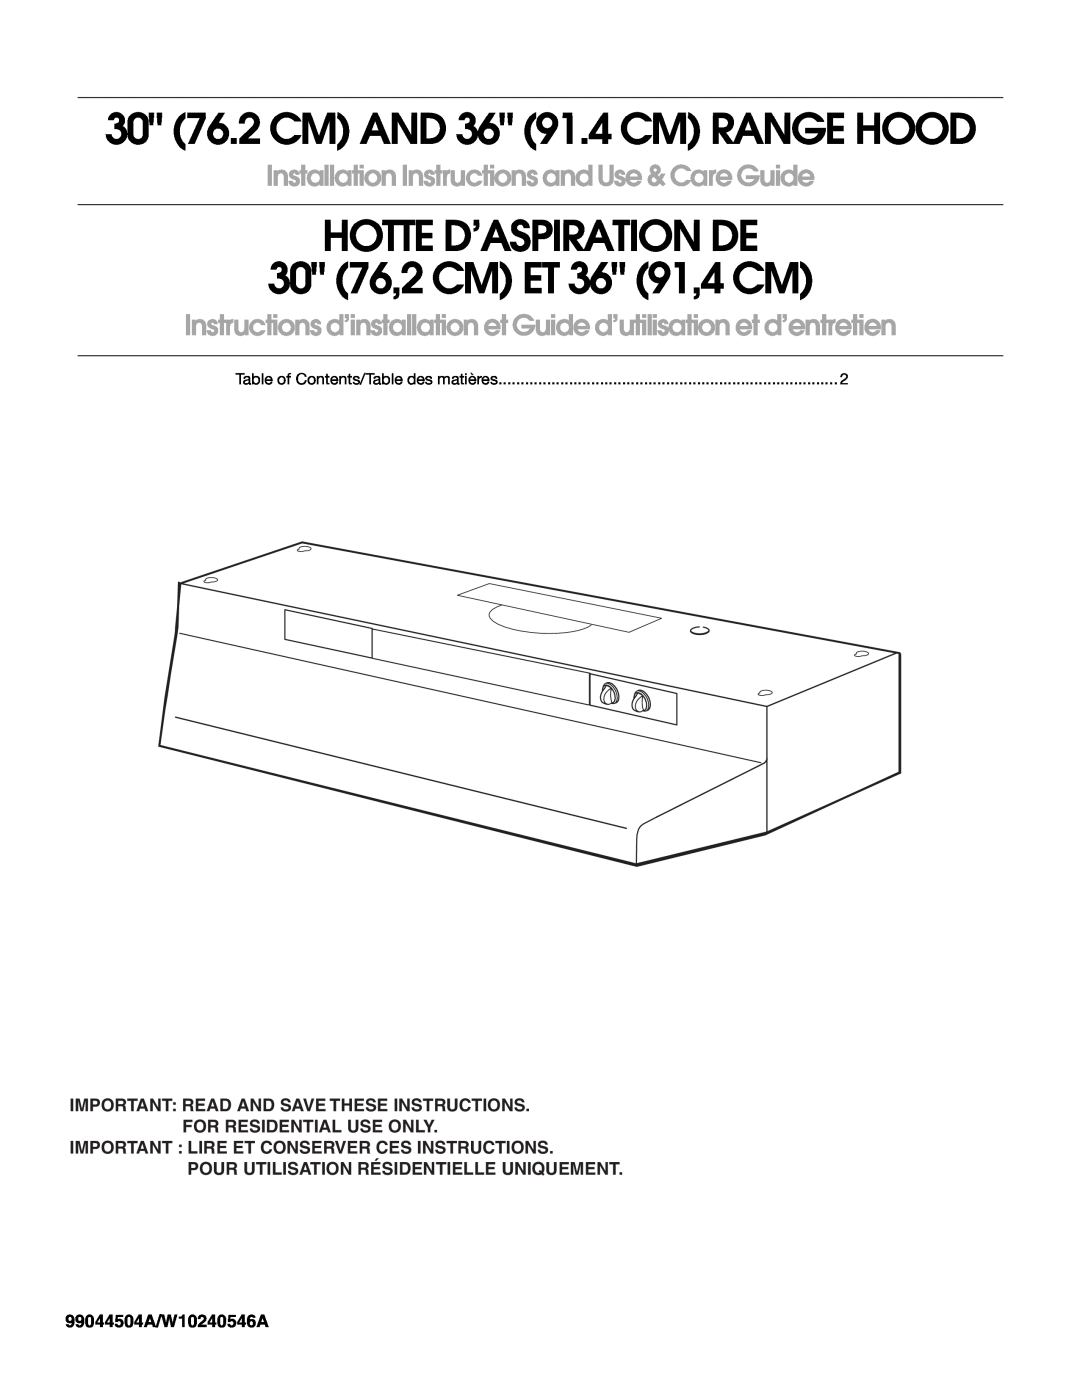 Whirlpool 99044504A installation instructions Important Read And Save These Instructions, For Residential Use Only 